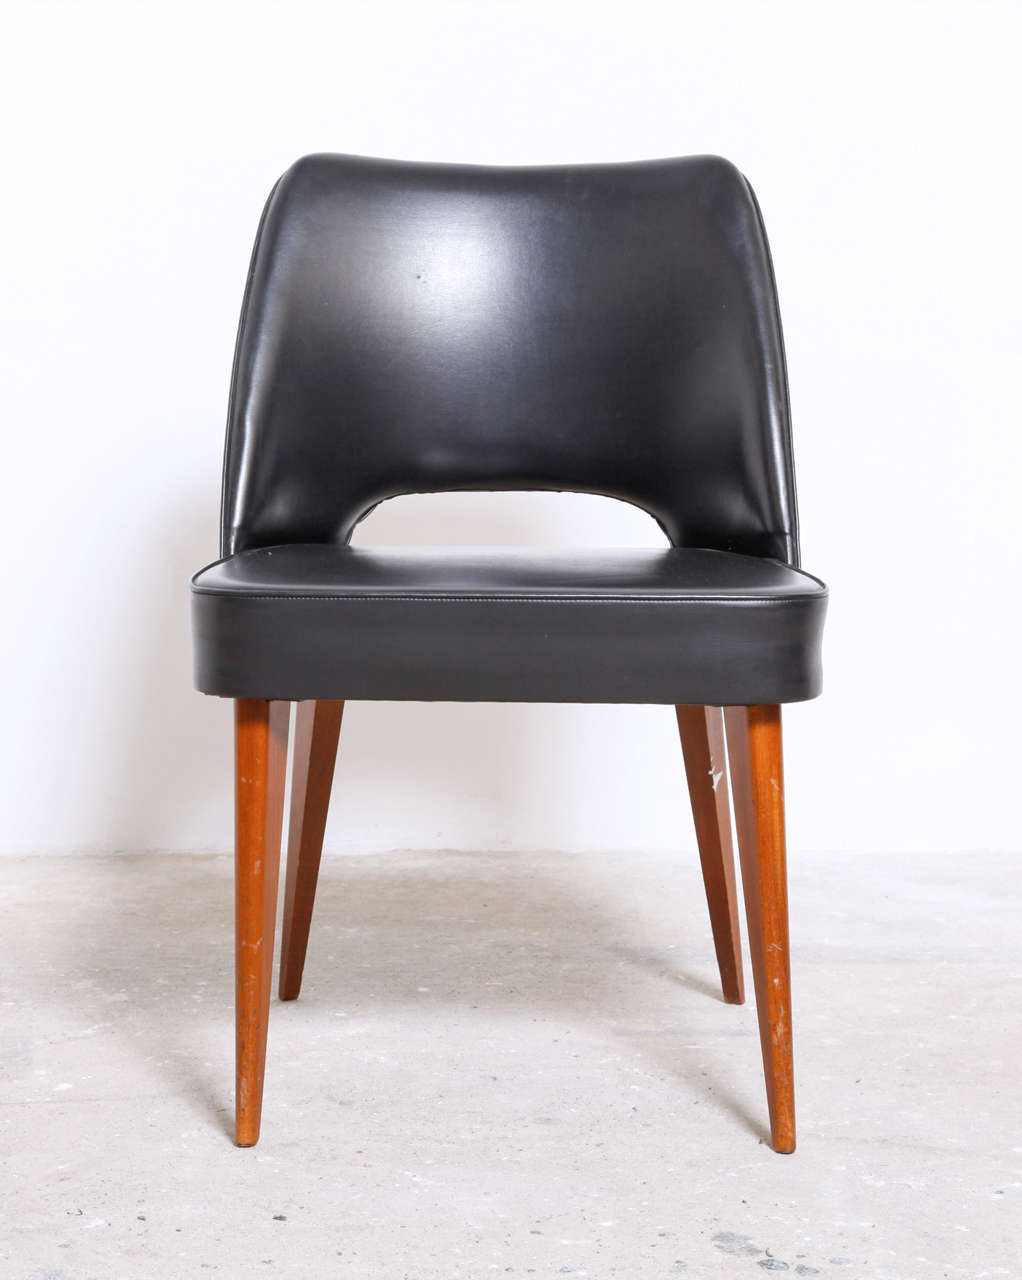 A set of three Mid-Century Modern chairs made by Thonet.
Three organic form 1950s chairs with black leather upholstered and wooden legs. Original condition.